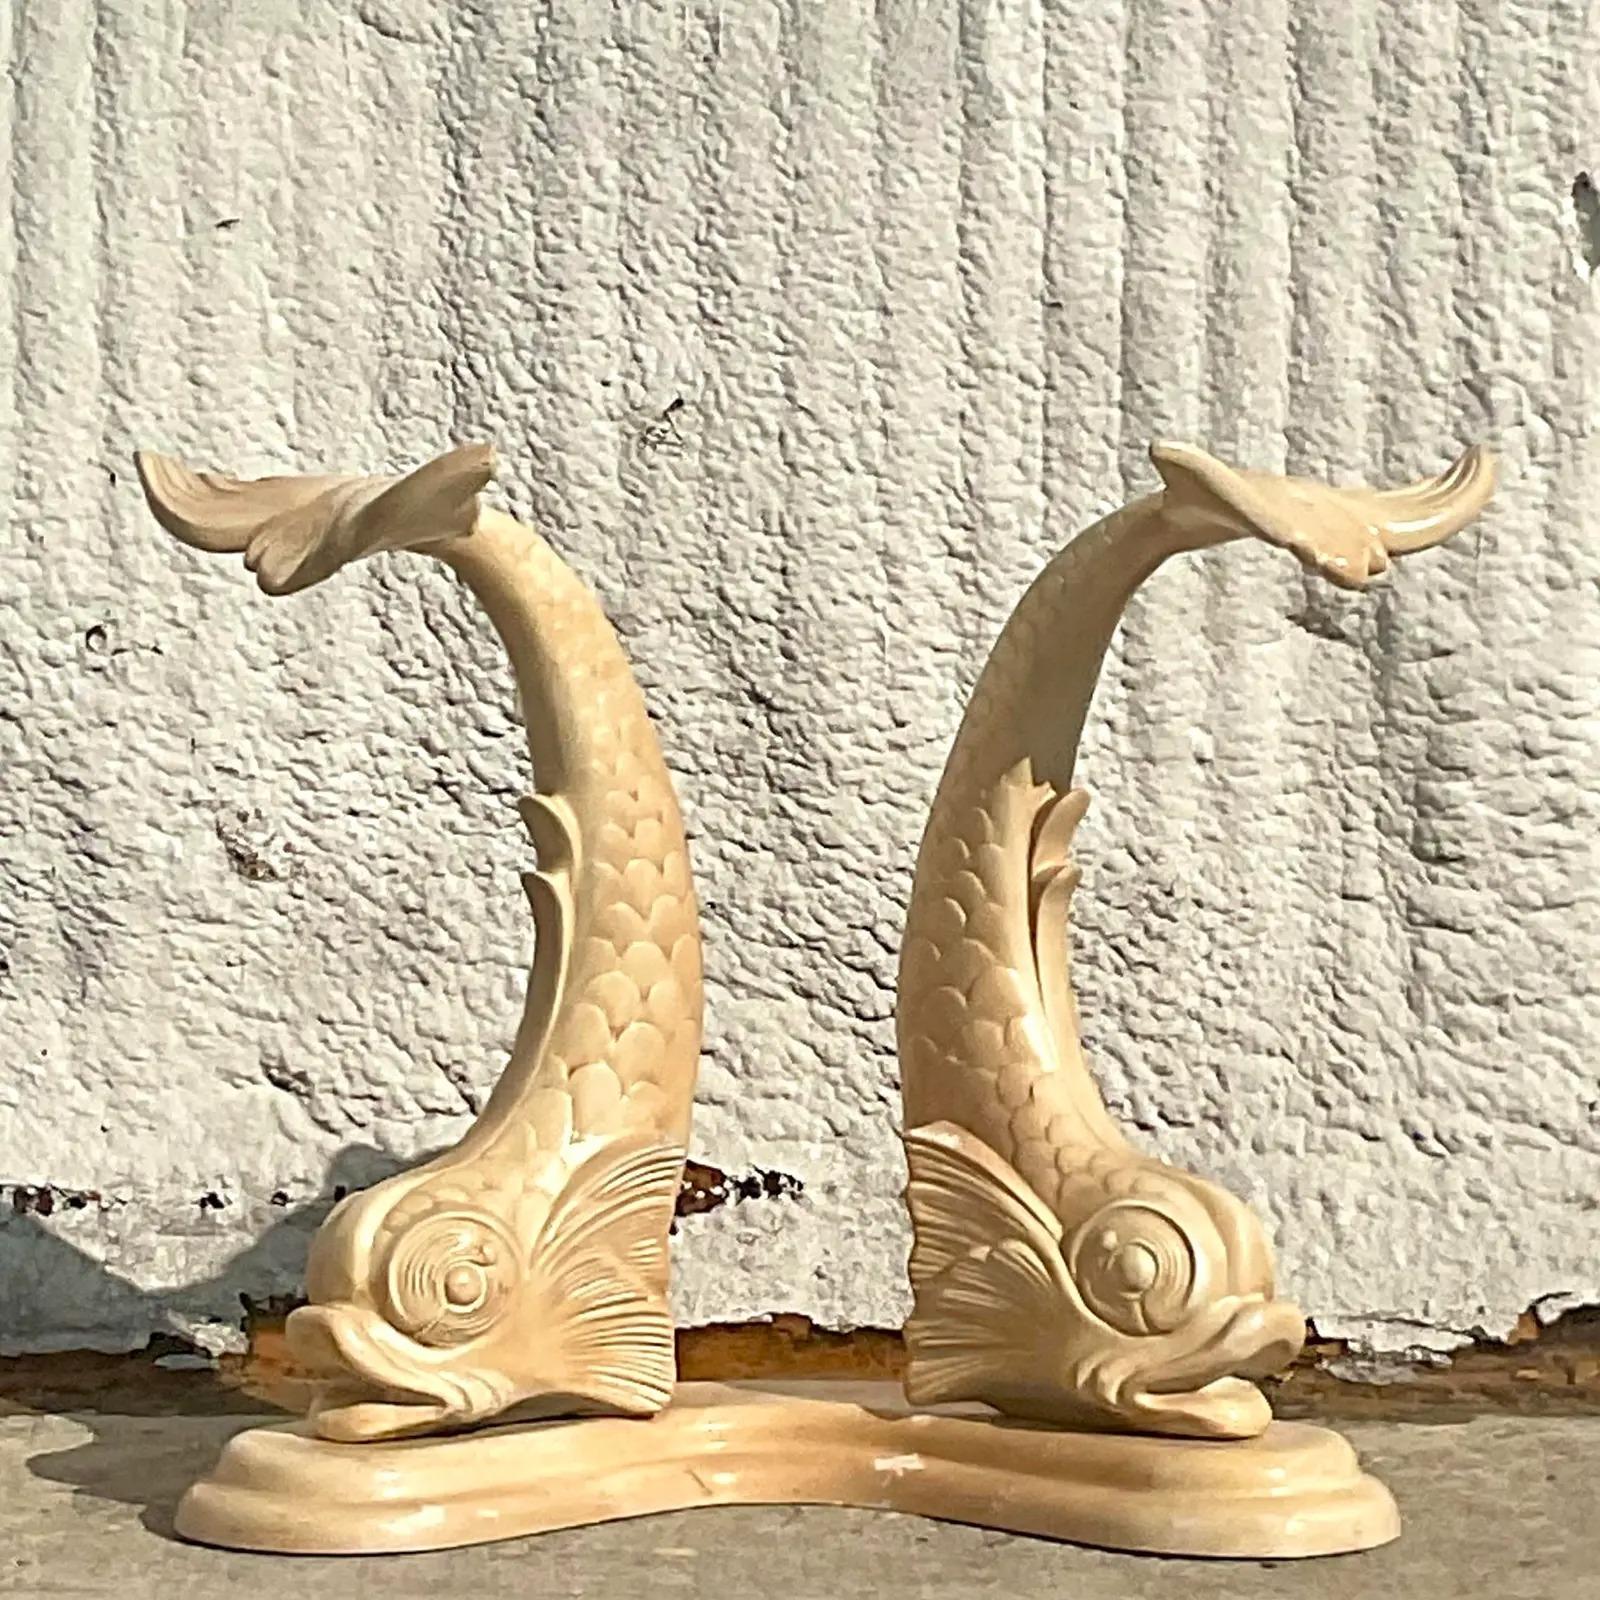 A fabulous vintage coastal console table pedestal. A chic Koi fish design with a boomerang base. Perfect as is or paint to suit your project. Acquired from a Palm Beach estate.